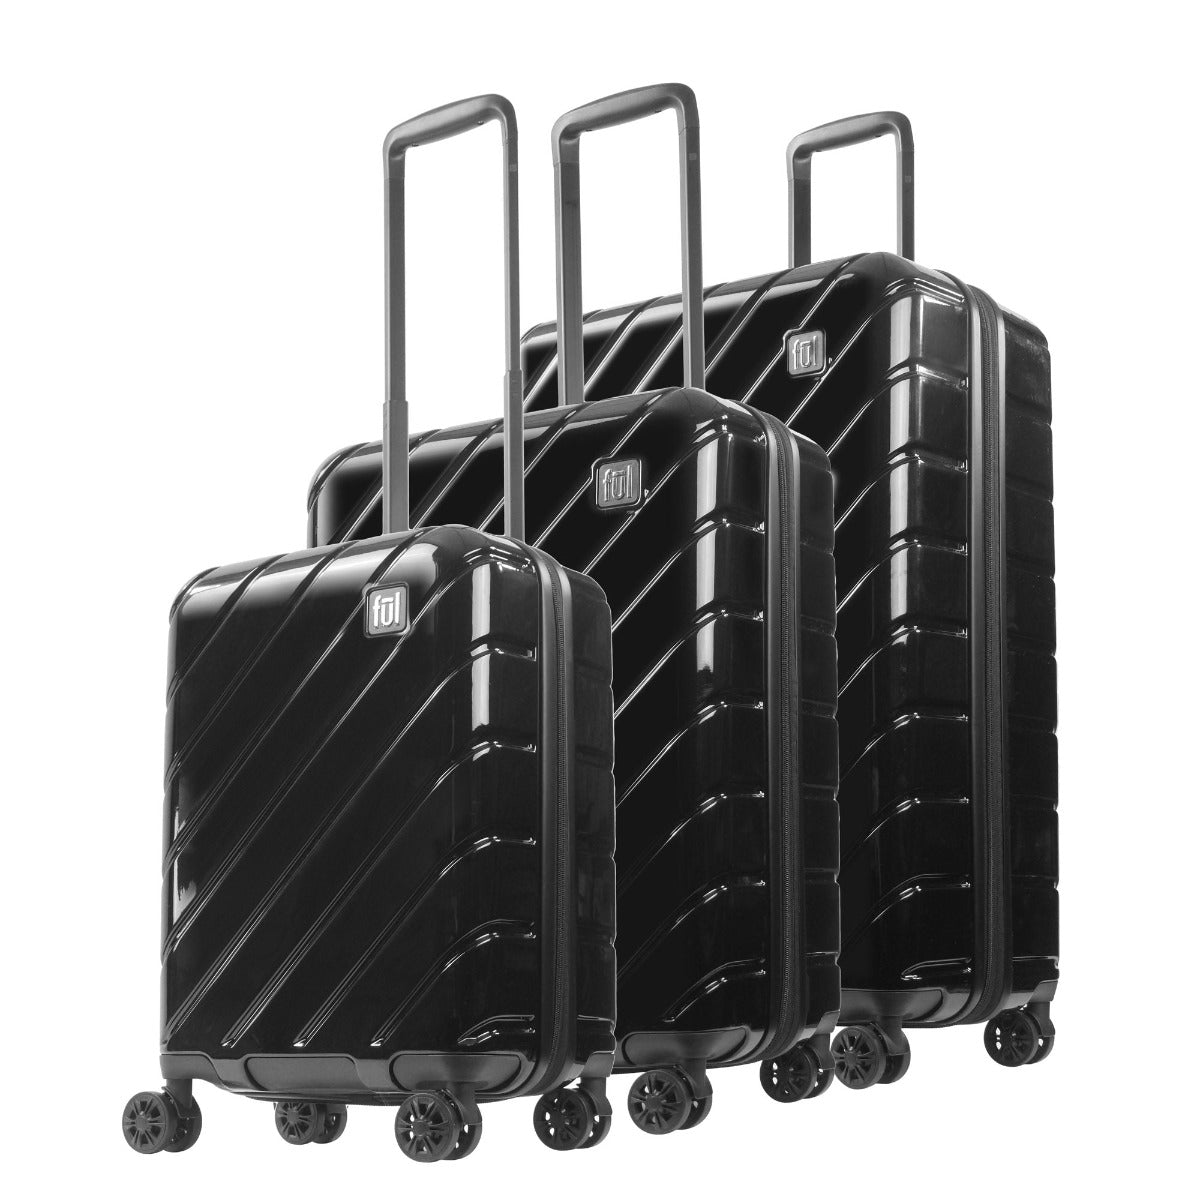 Velocity Hardside Spinner Luggage 3 Piece Checked Suitcase Black 23 inch 27 inch 31 inch